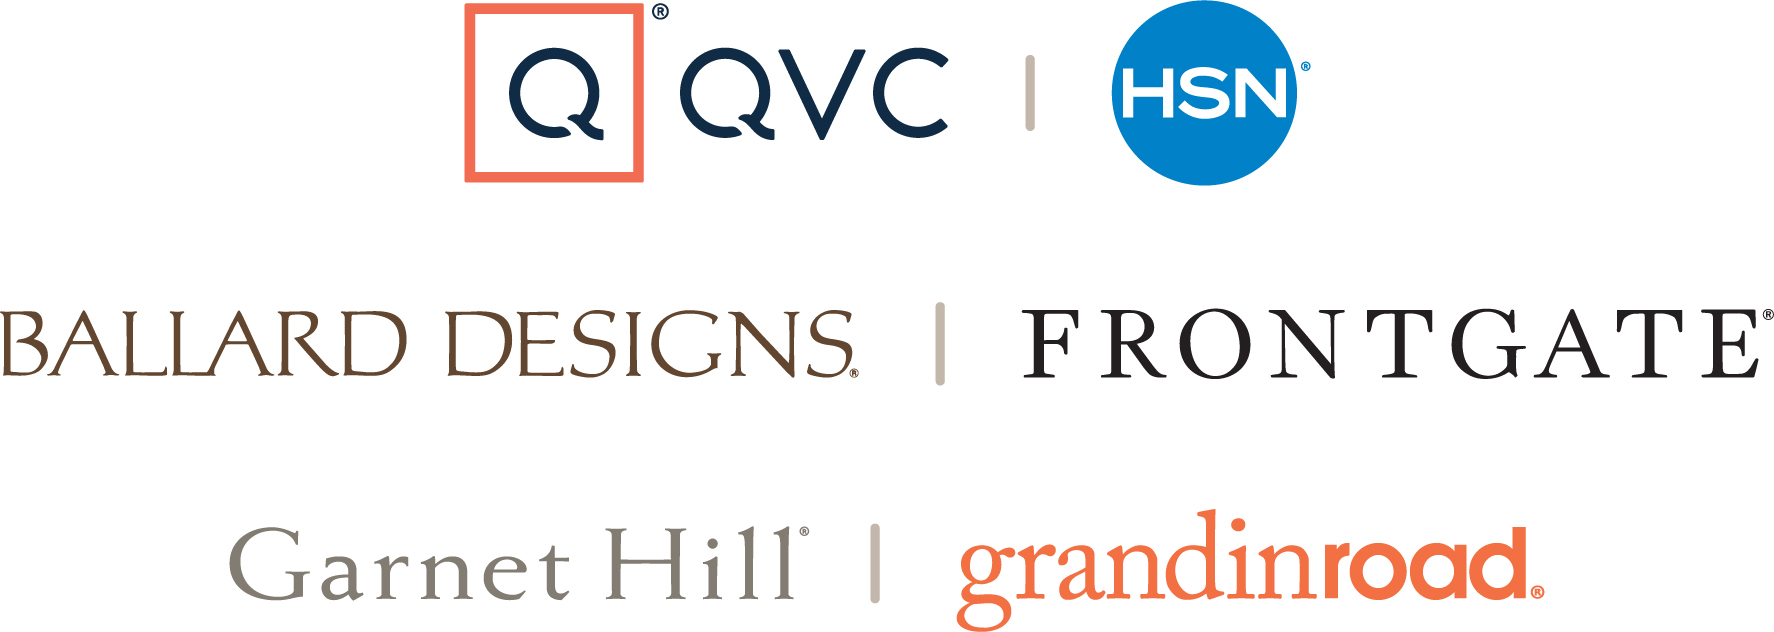 Qurate Retail Group Brands Logo Stack